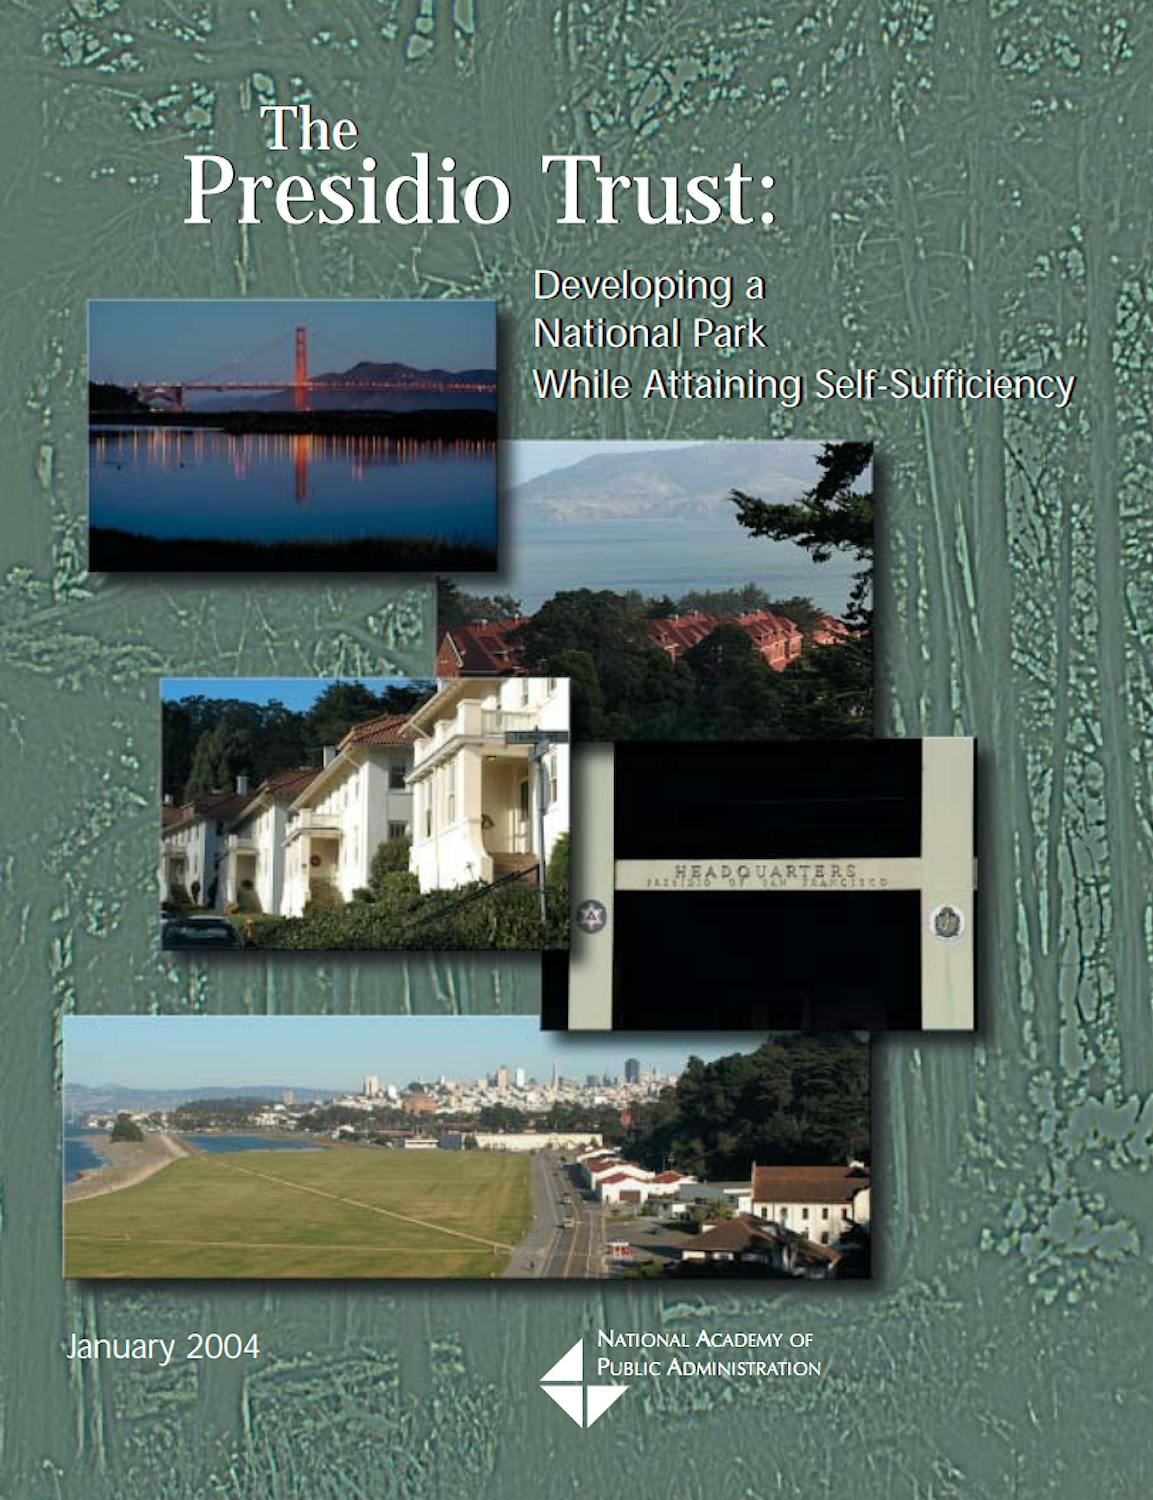 04 Presidio Trust Developing National Park While Attaining Self Sufficiency